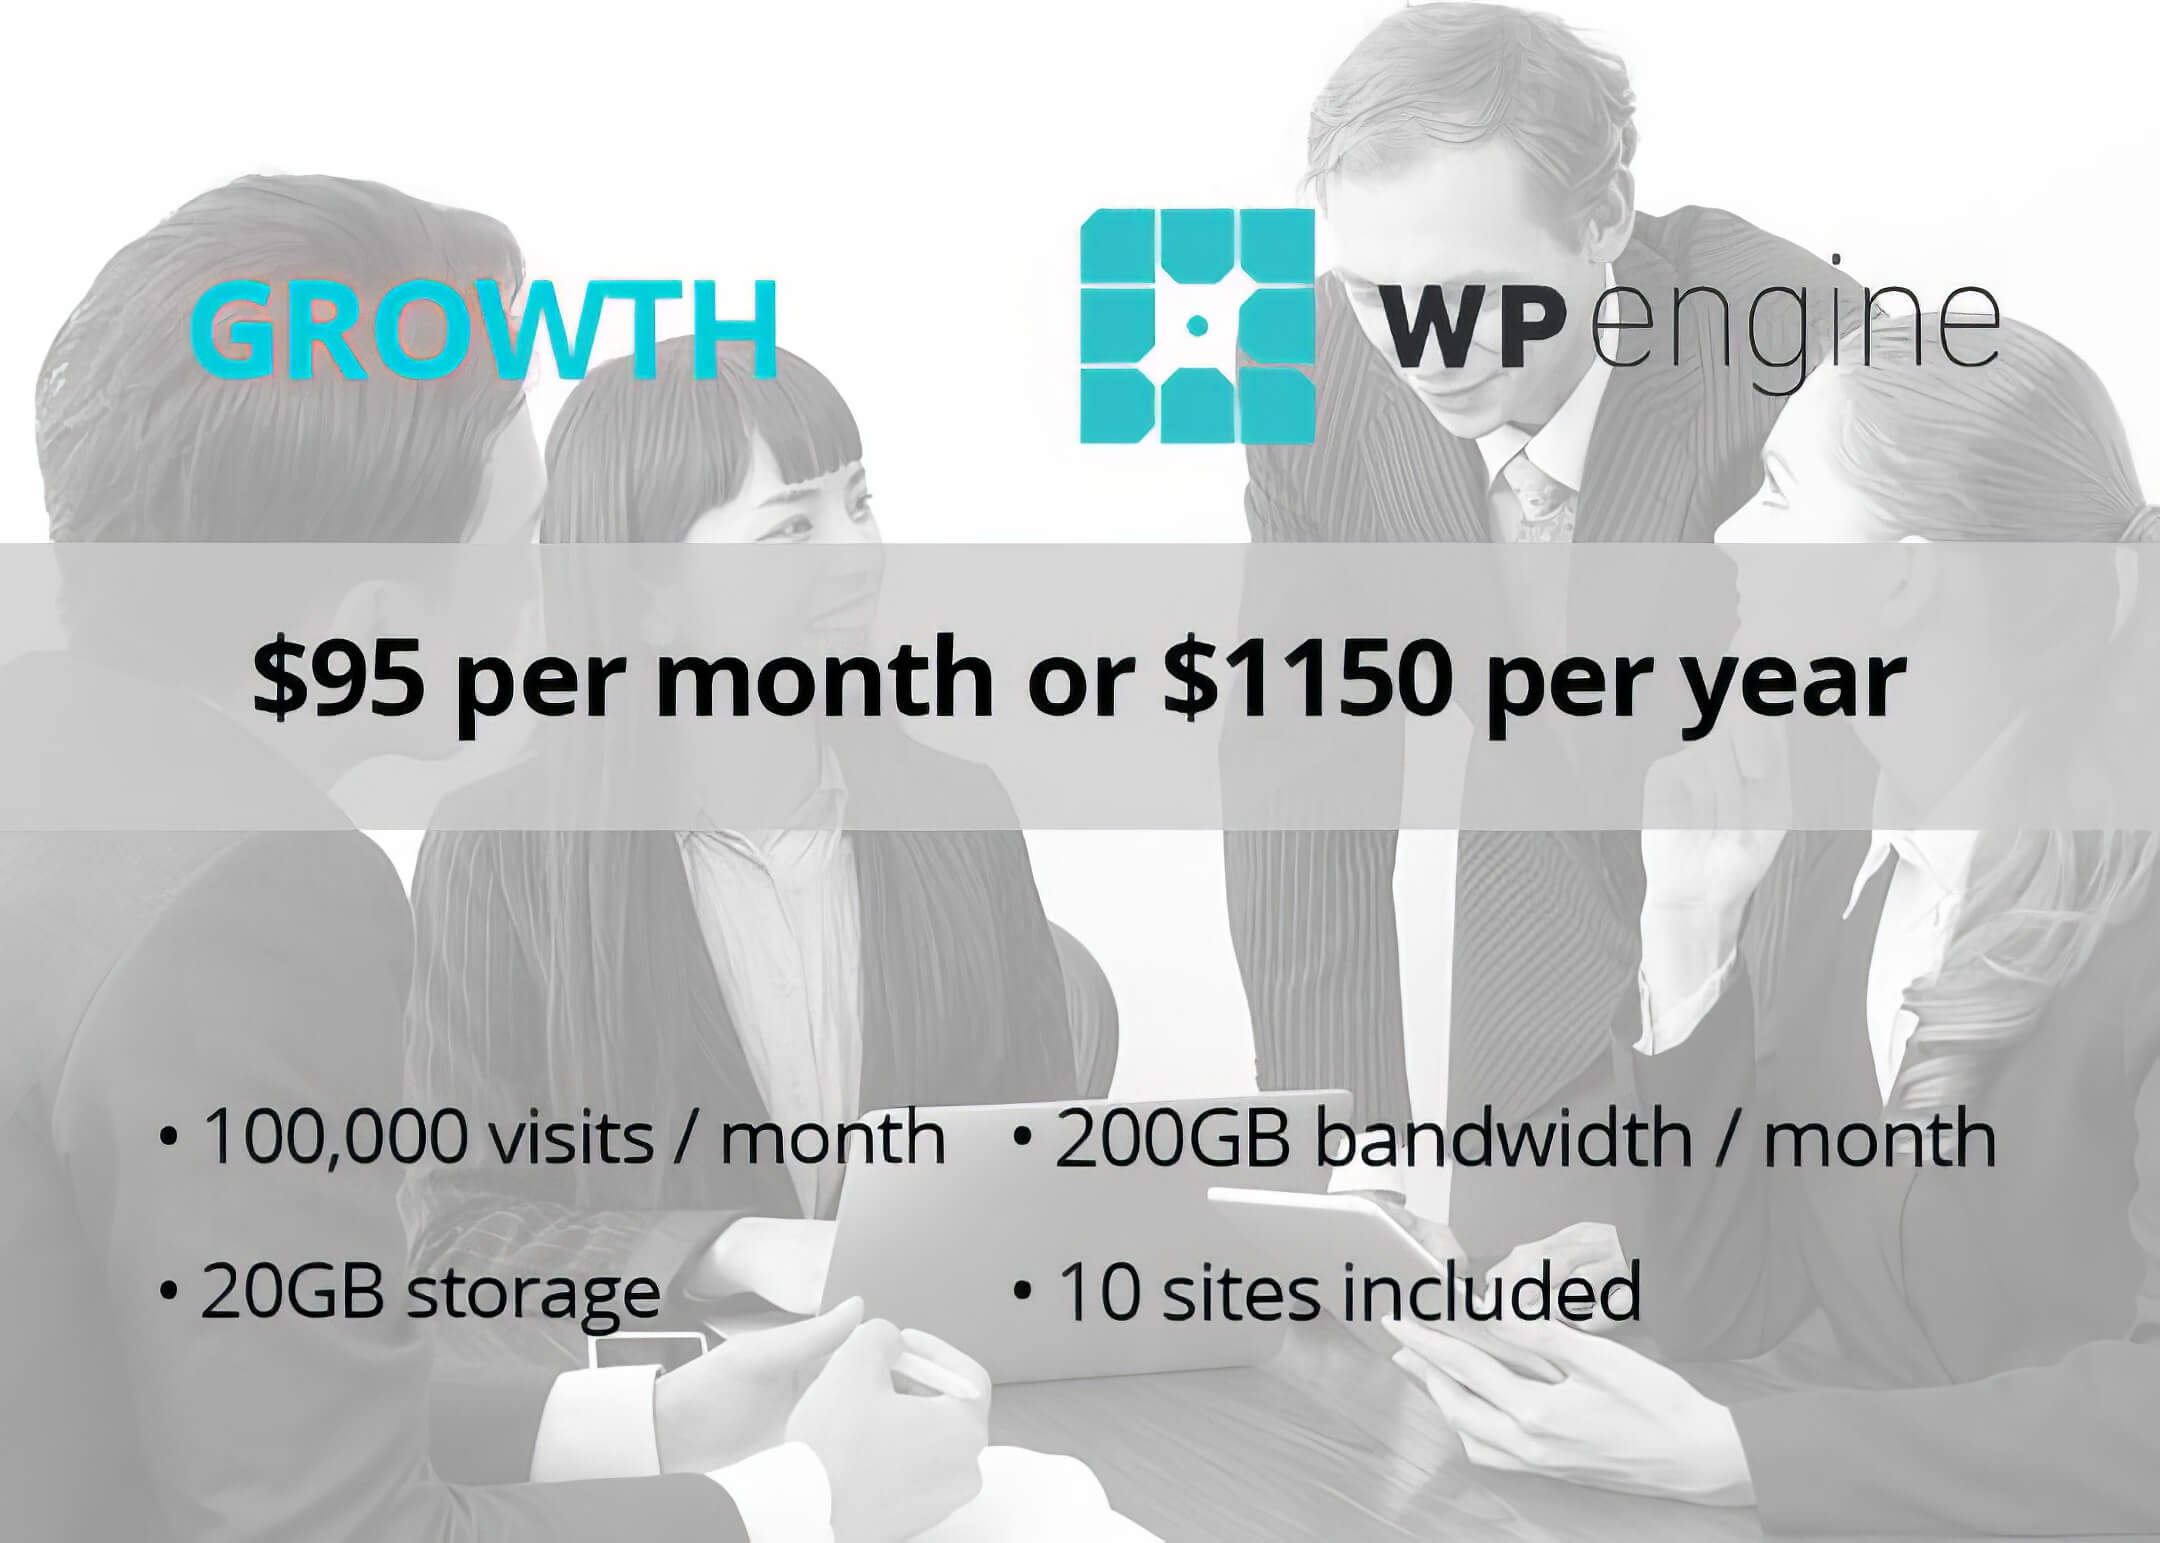 features of growth plan of wp engine